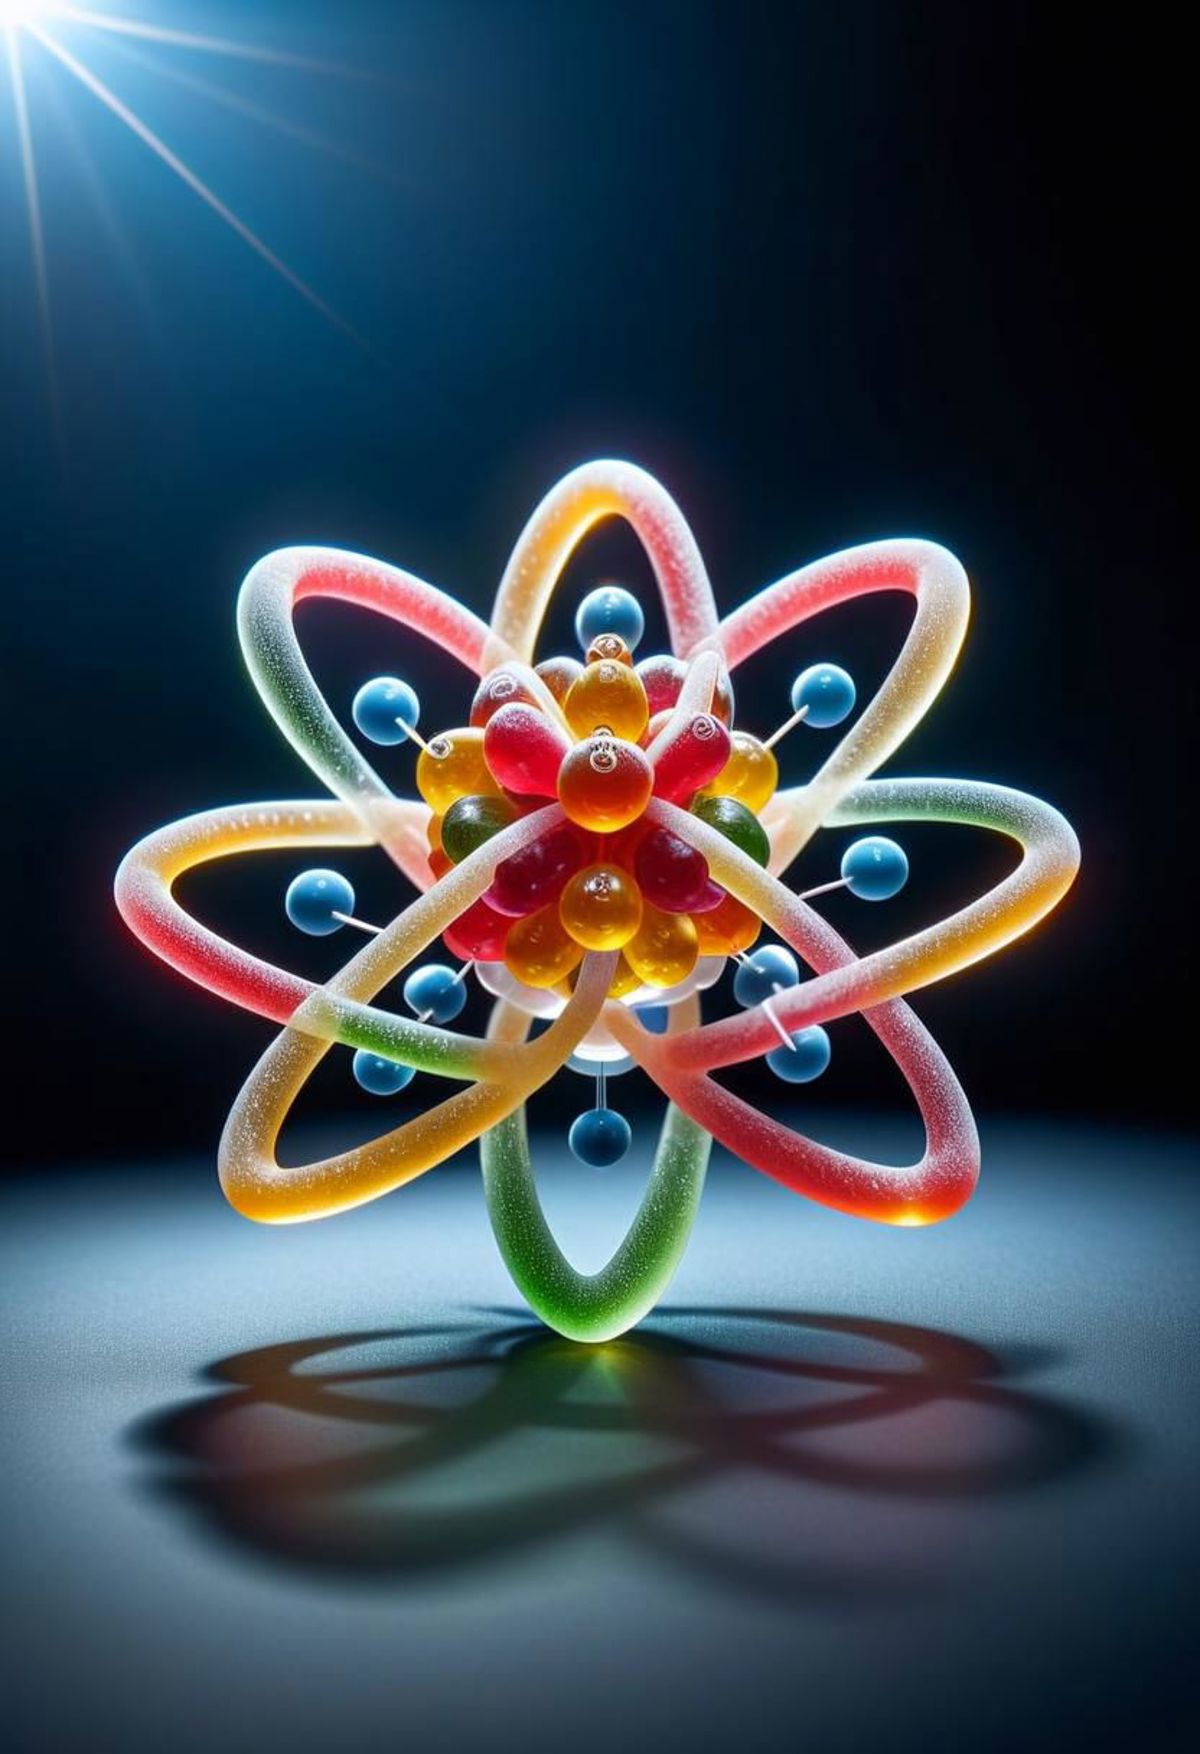 A Model of the Atom with Gummy Atoms and Balls